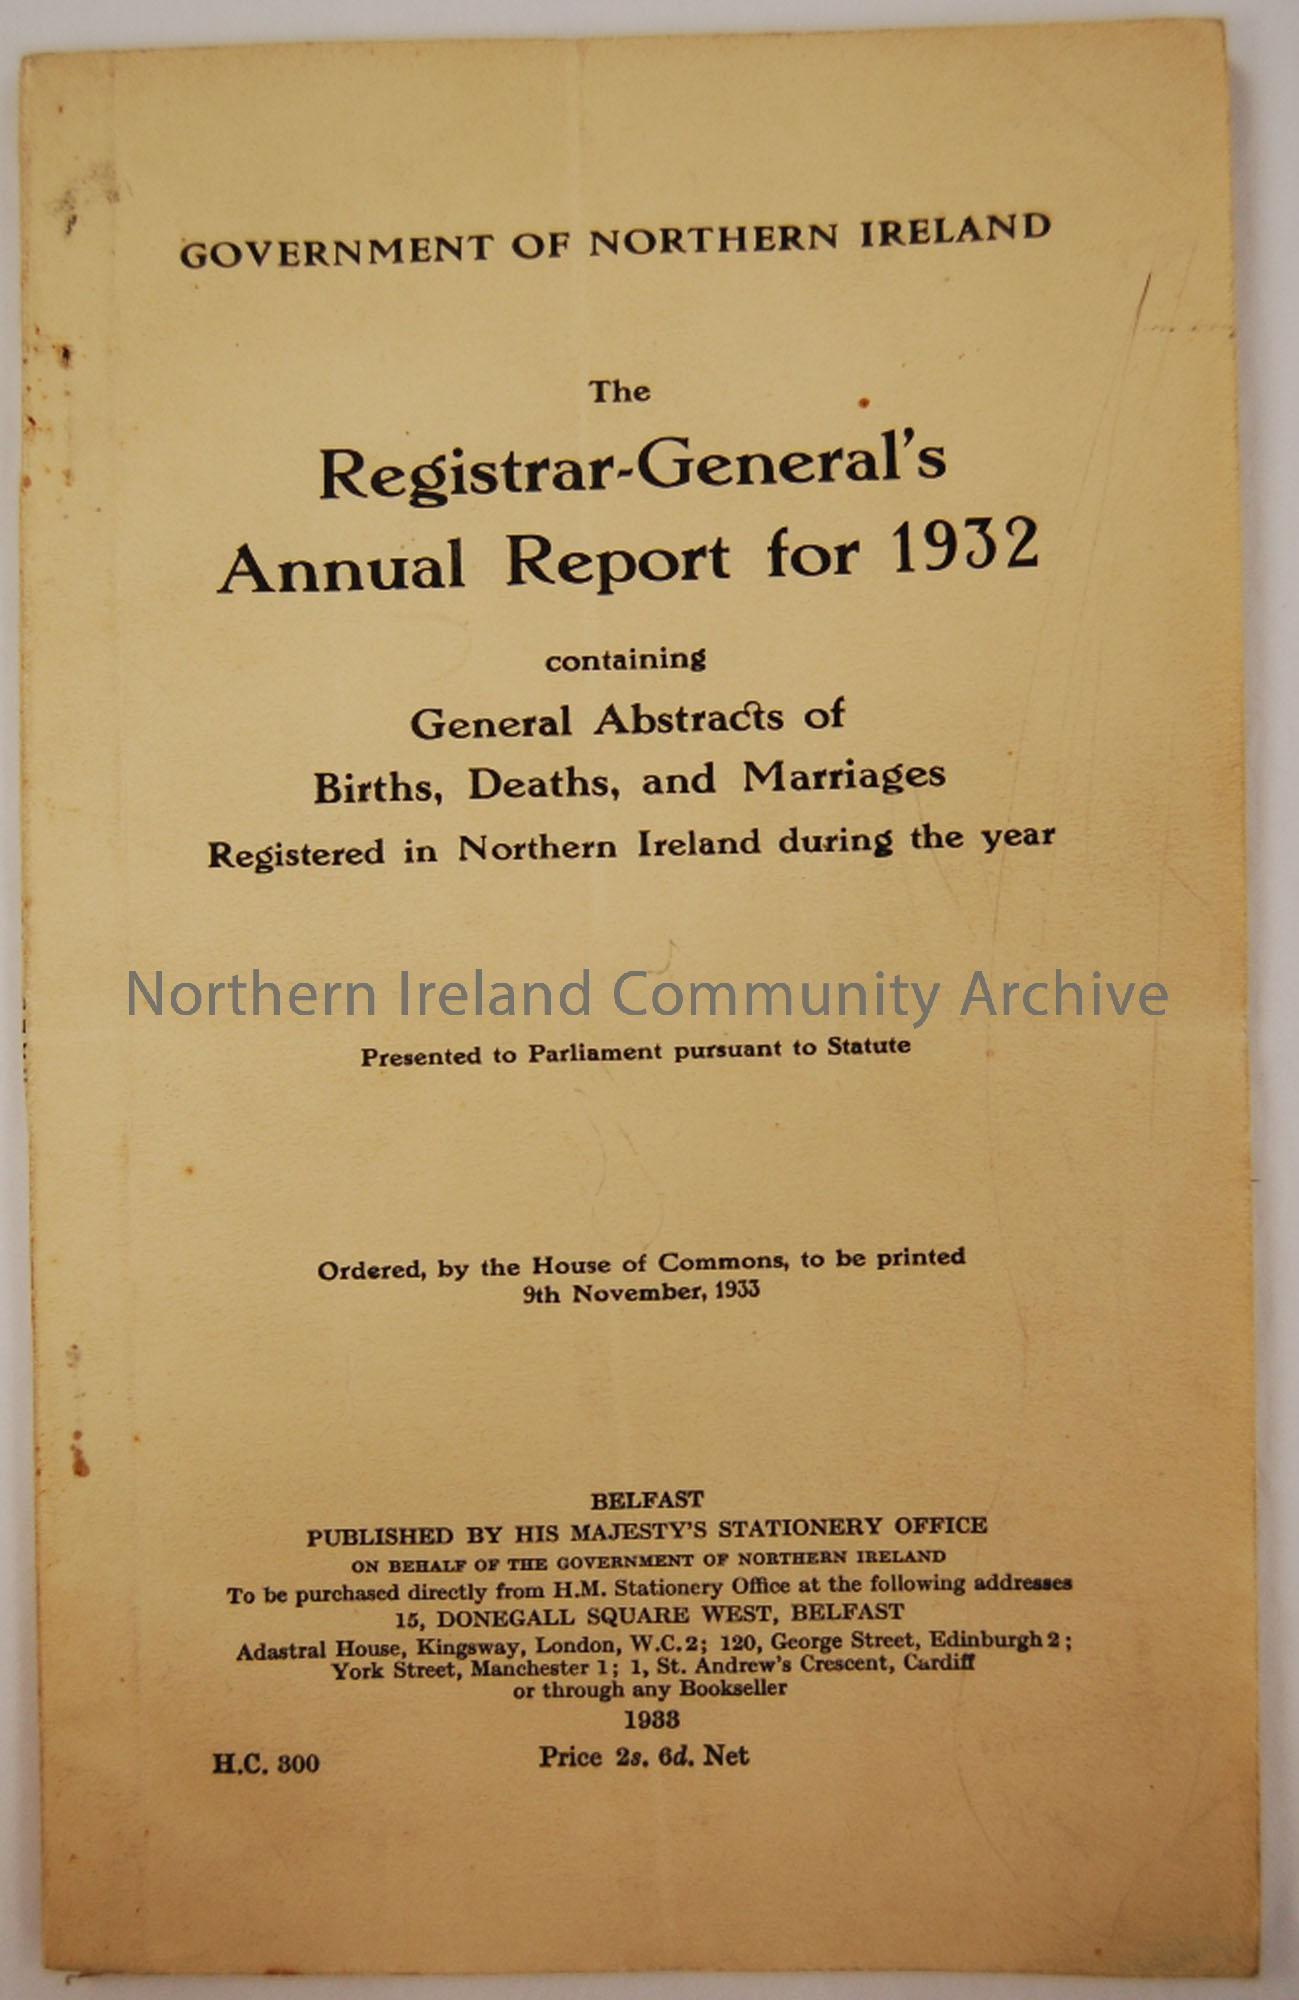 Government of Northern Ireland, ‘The Registrar-General’s Annual Report for 1932’ containing General Abstracts of Births, Deaths, and marriages Registe…